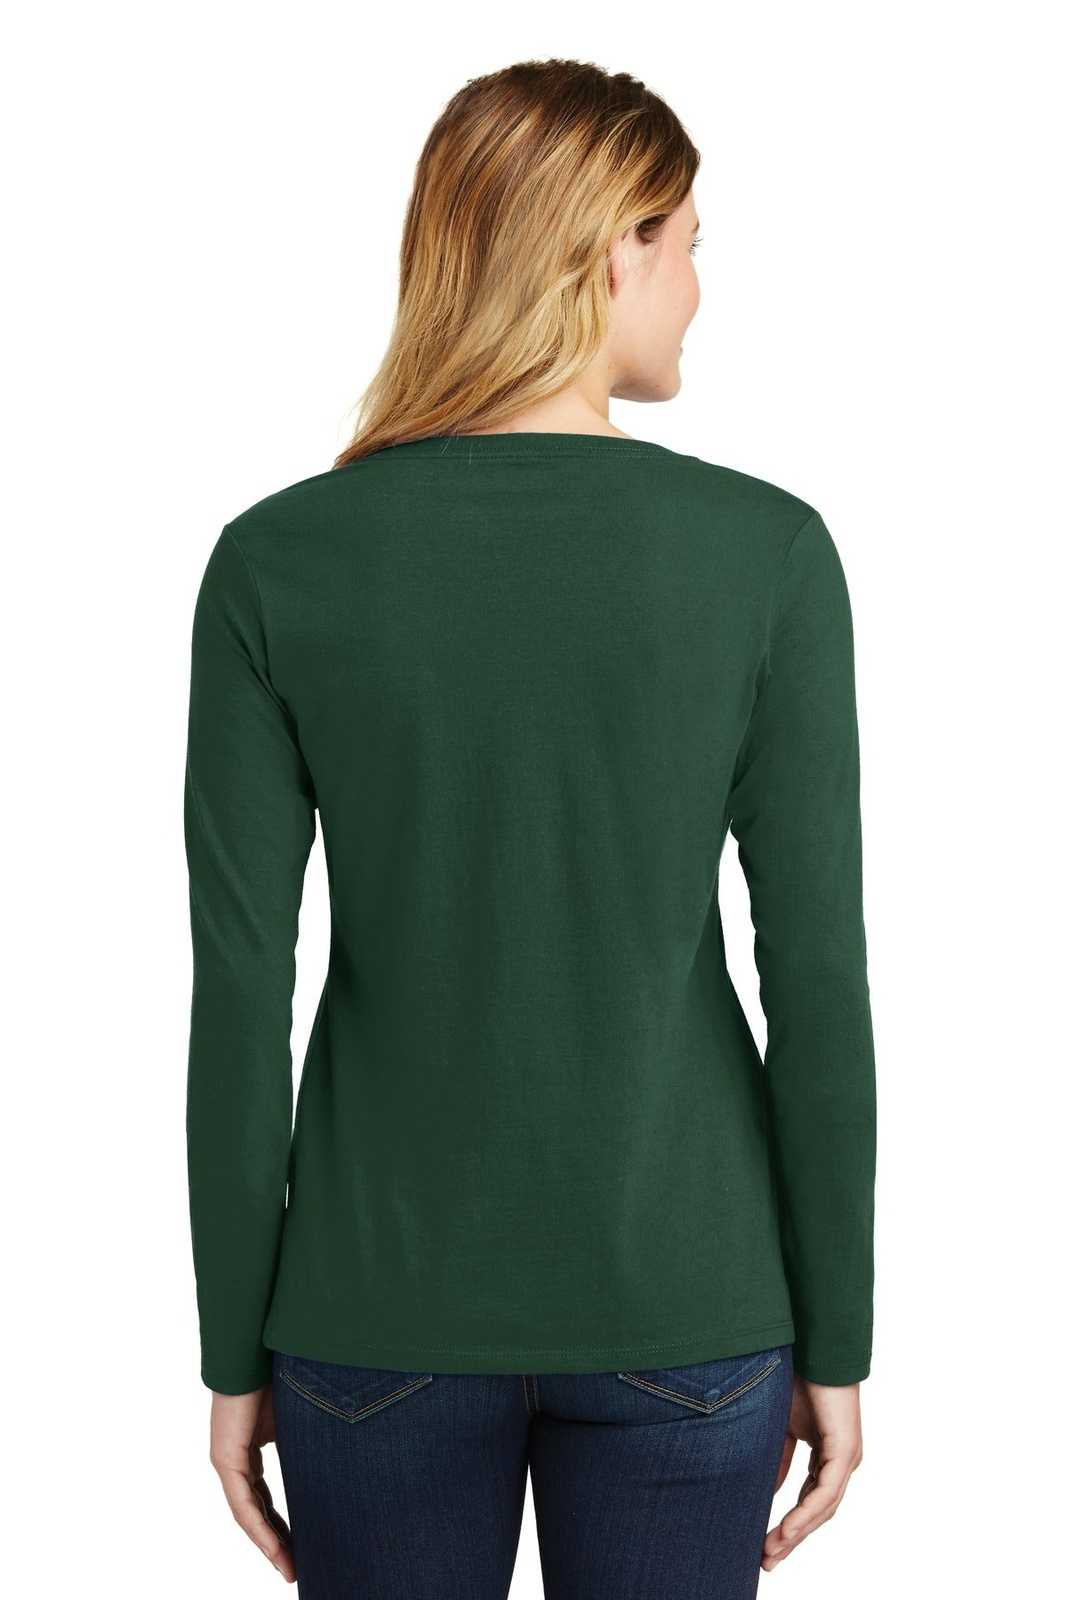 Port &amp; Company LPC450VLS Ladies Long Sleeve Fan Favorite V-Neck Tee - Forest Green - HIT a Double - 2